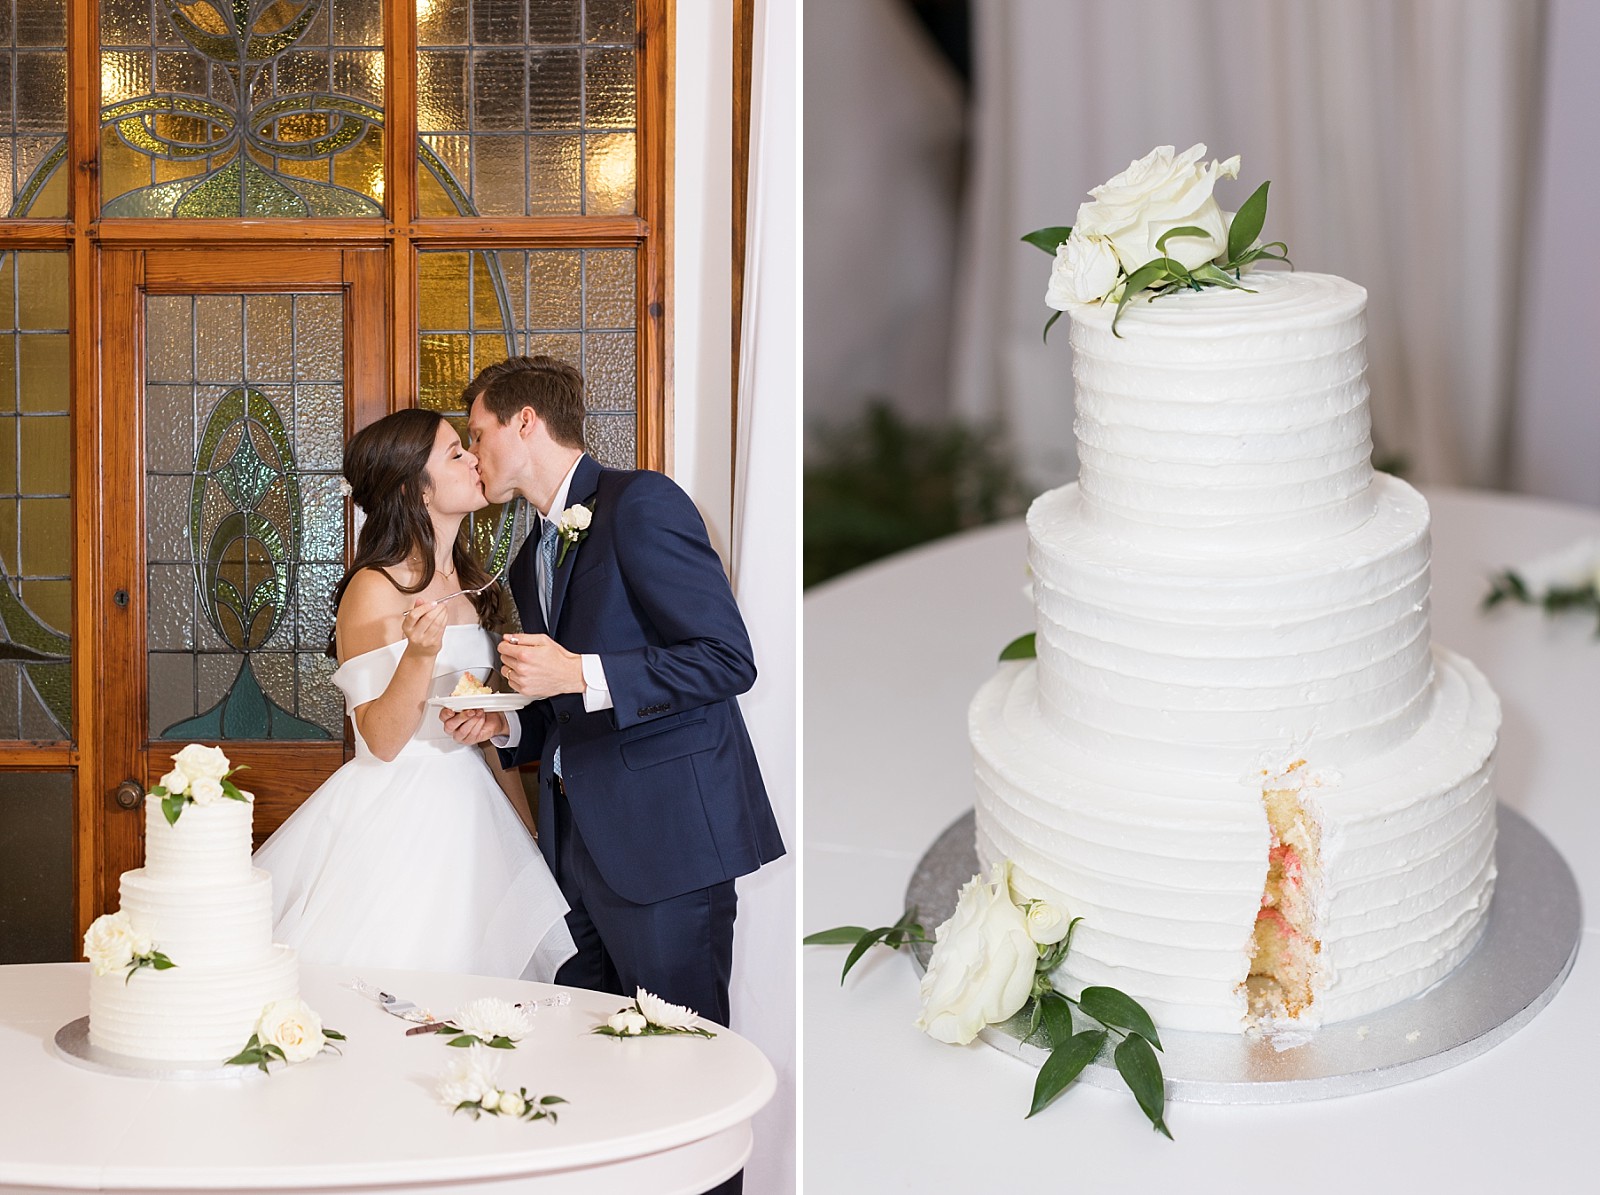 Bride and groom kissing after cake tasting and details of inside of cake  | The Meadows in Raleigh | Raleigh NC Wedding Photographer